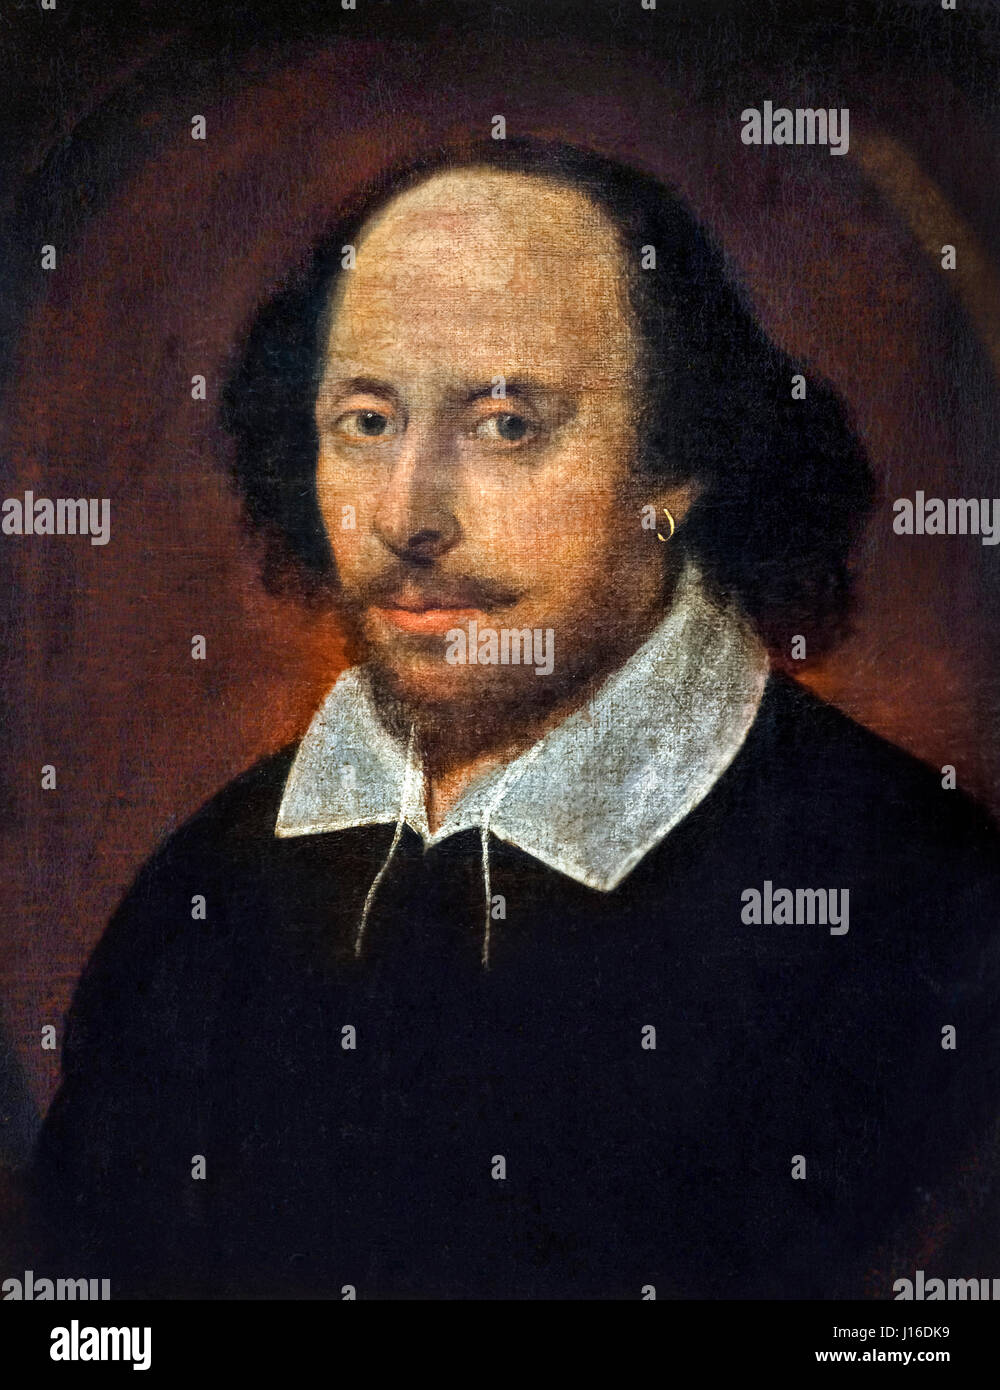 William Shakespeare, the Chandos Portrait. Painting of William Shakespeare, attributed to John Taylor, oil on canvas, c.1600-1610. Stock Photo